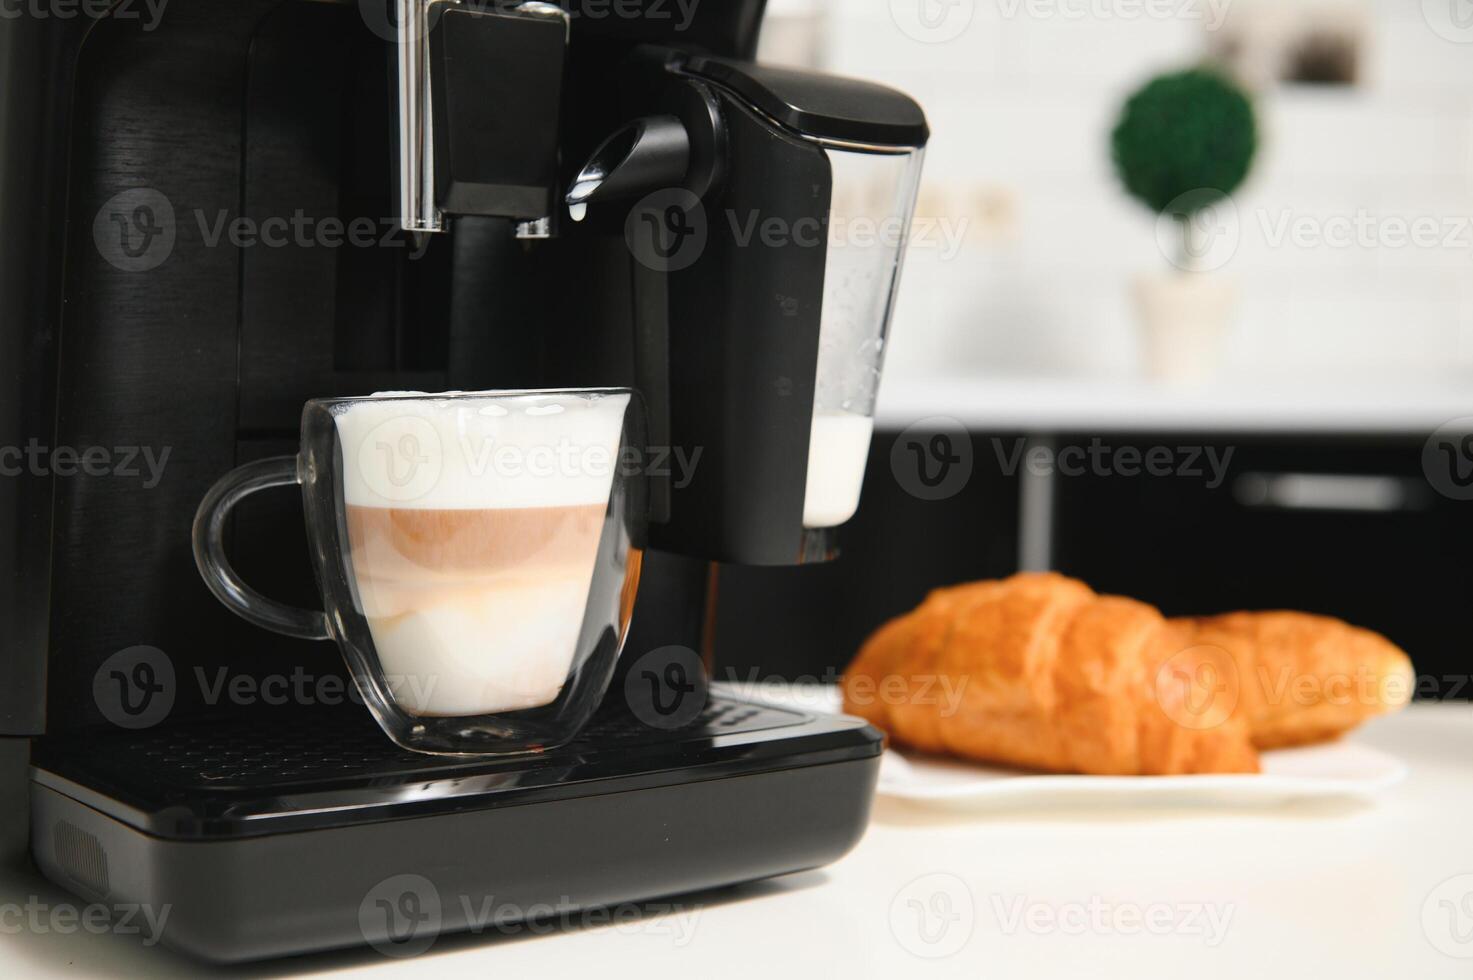 Modern coffee machine with glass cup of latte on white marble countertop in kitchen photo